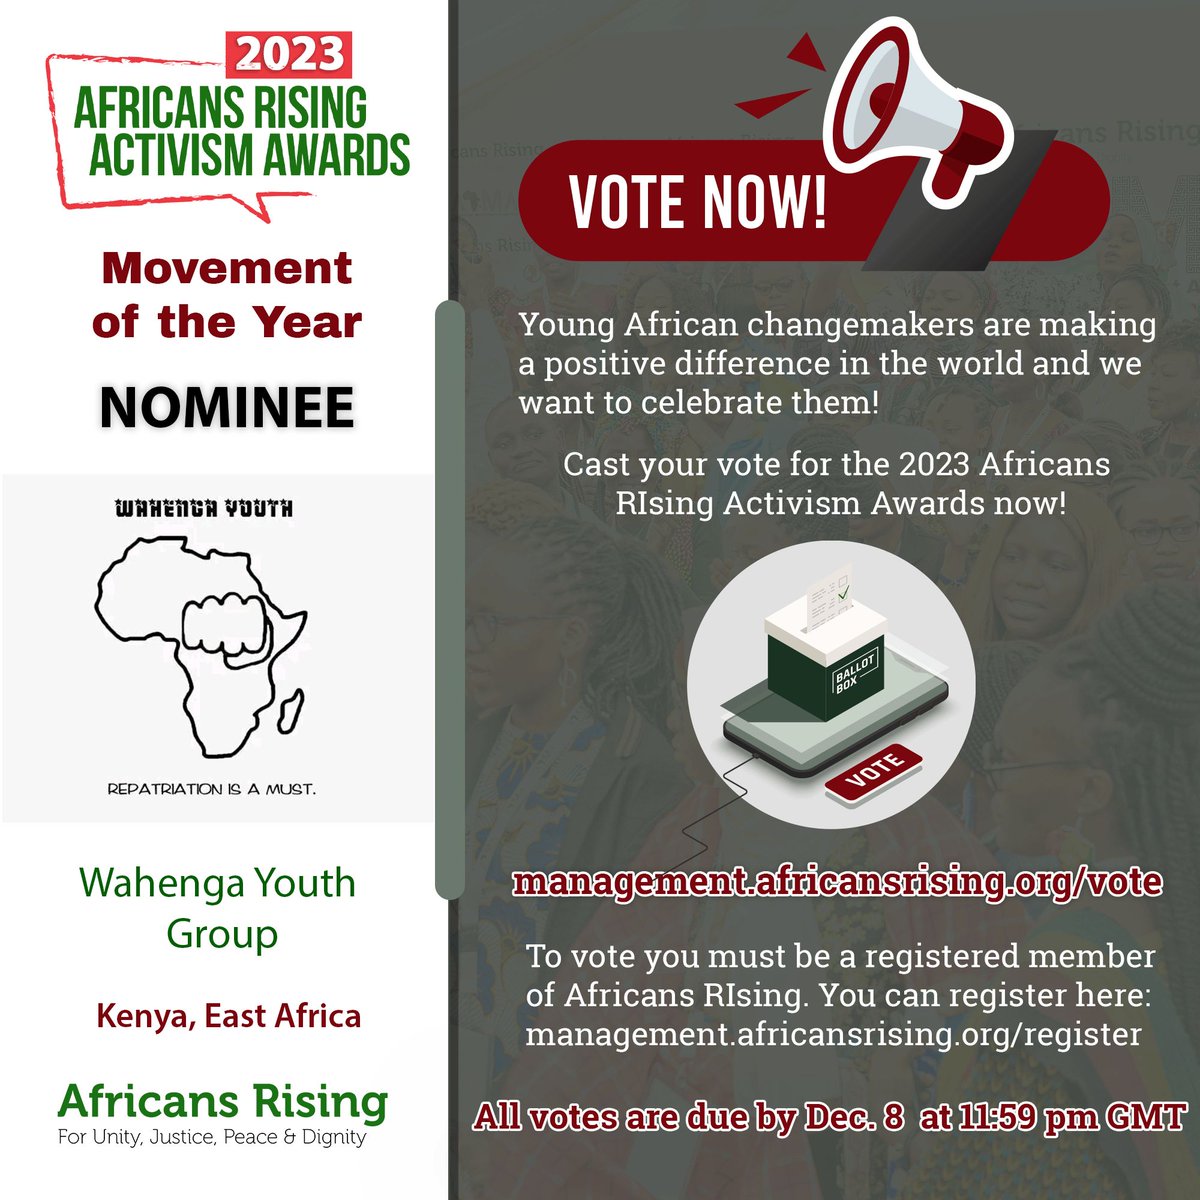 A movement of youth, the Wahenga Youth Group based in #Kenya, #EastAfrica, is a nominee of the 5th edition of the #AfricansRising #ActivisimAwards. They are seeking your vote. To cast your vote, register as a member and proceed to vote! 

#ActivismAwards
#BorderlessAfrica